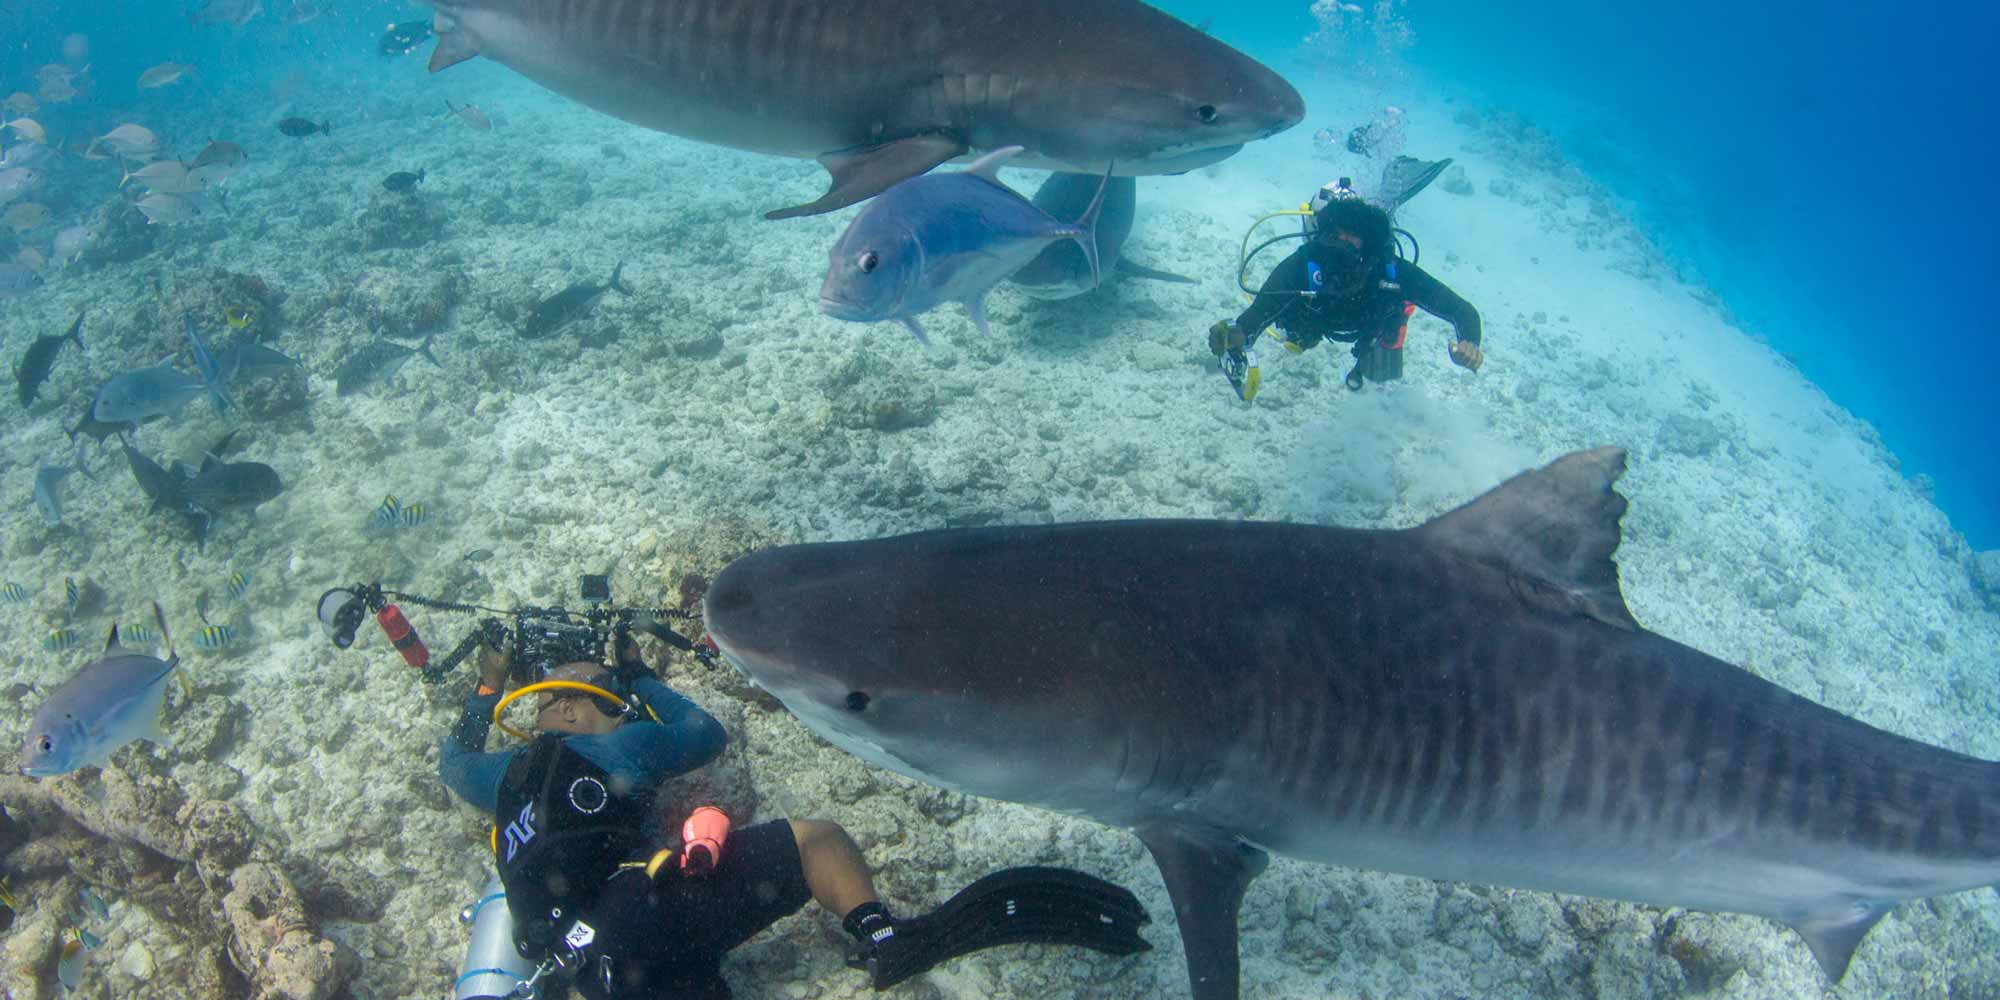 Tigers sharks surrounding scuba divers from behind, keep eye contact